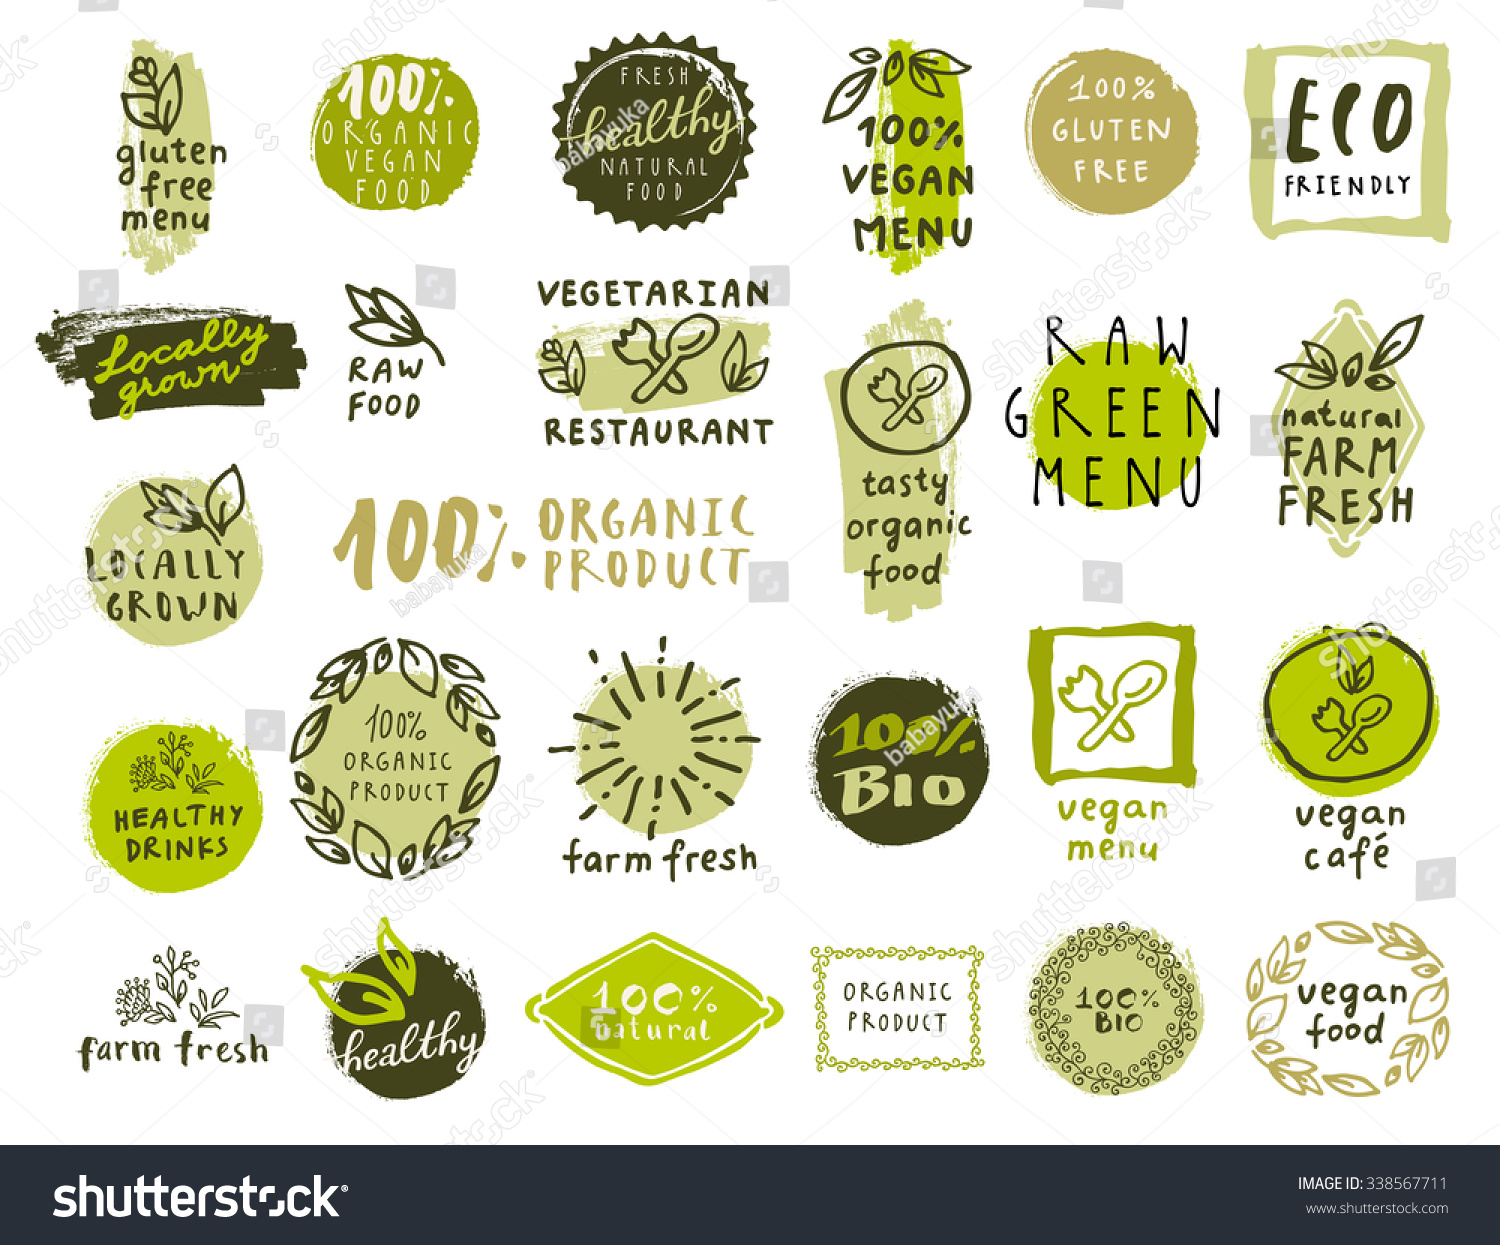 Retro set of 100% bio, organic, gluten free, eco, healthy food labels. Hand drawn logo templates. Vintage elements for restaurant menu or organic food package. Vector health food badges, hipster style #338567711